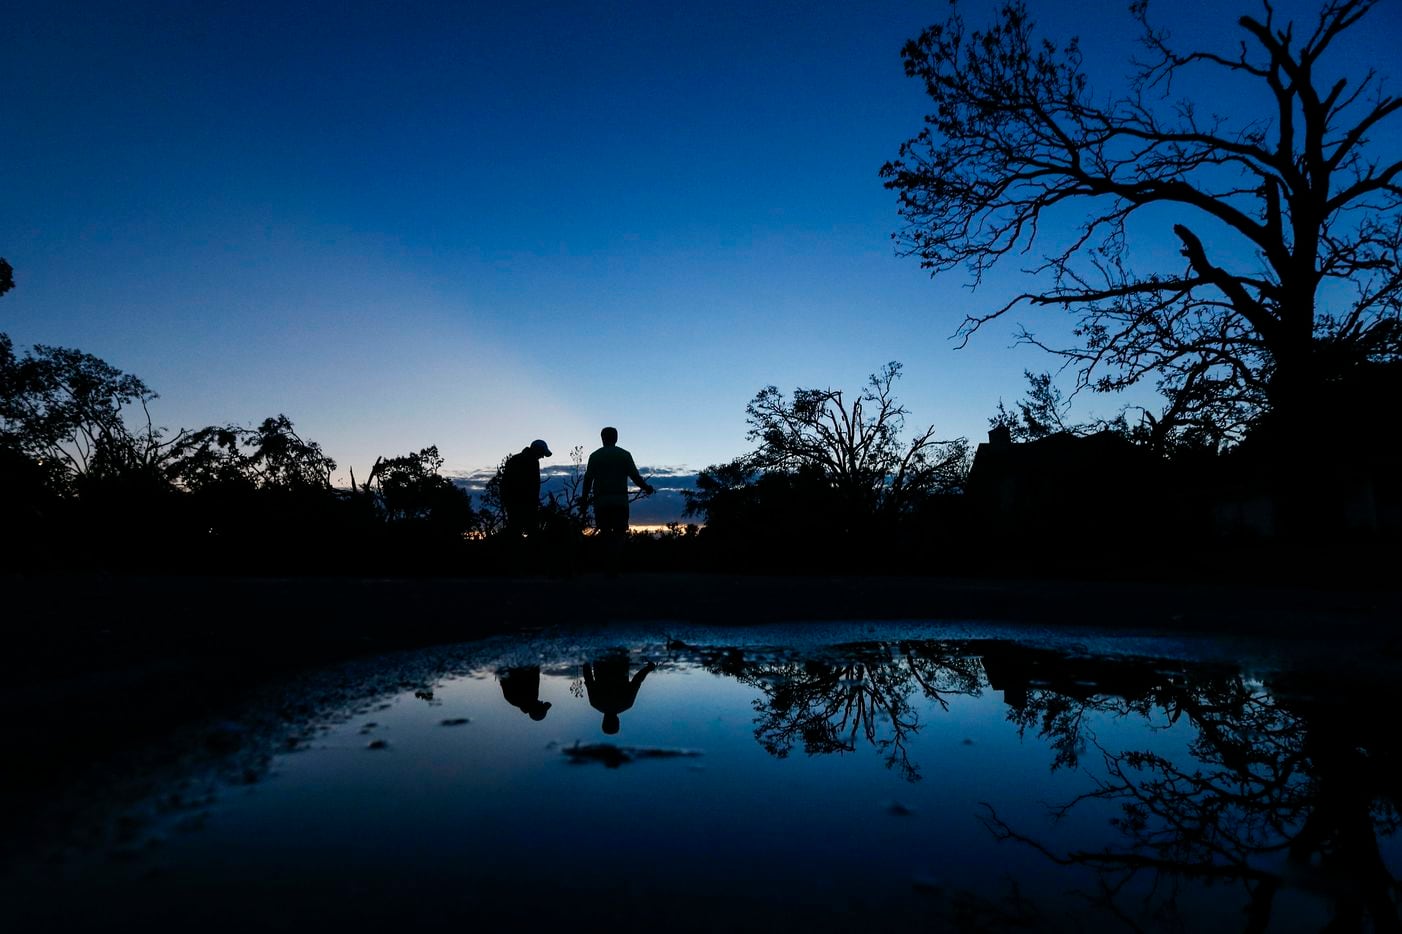 As the sunrises, homeowners Dennis Gambow, left, and Eric Charton emerge to survey damage...